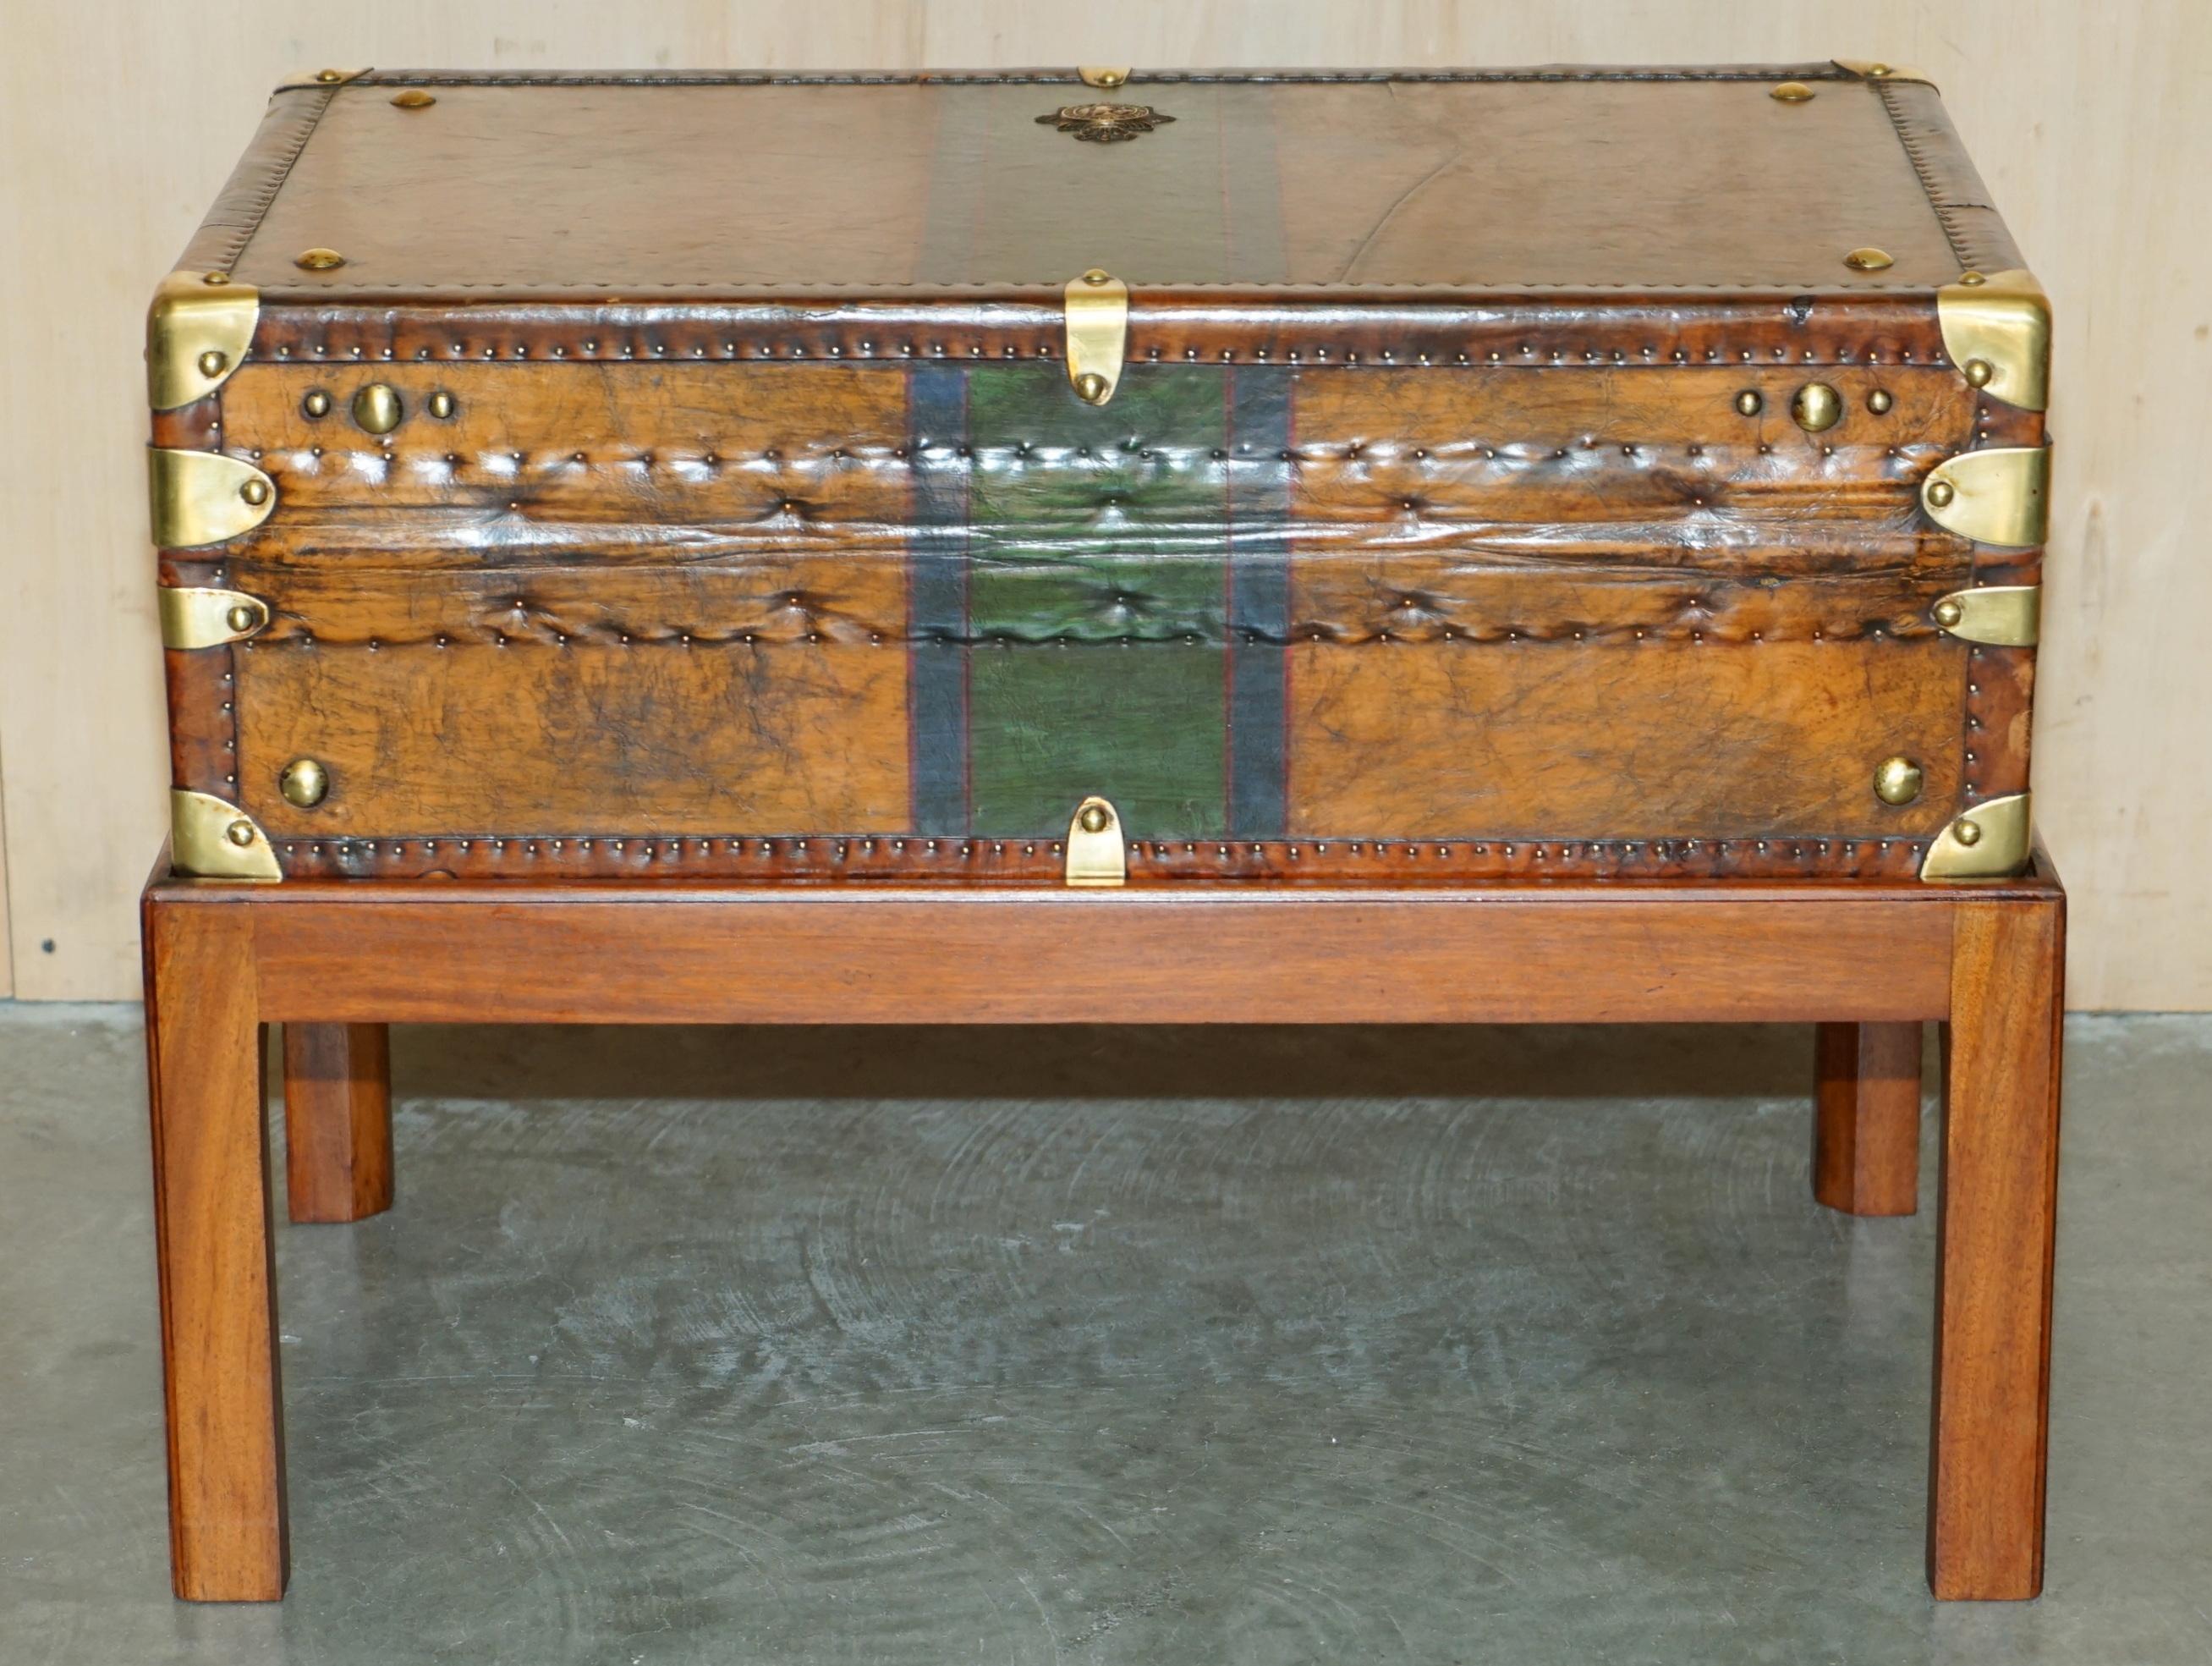 RESTORED BRITISH ARMY BROWN LEATHER TRUNK COFFEE TABLE HONI SOIT QUI MAL Y PENSe For Sale 11